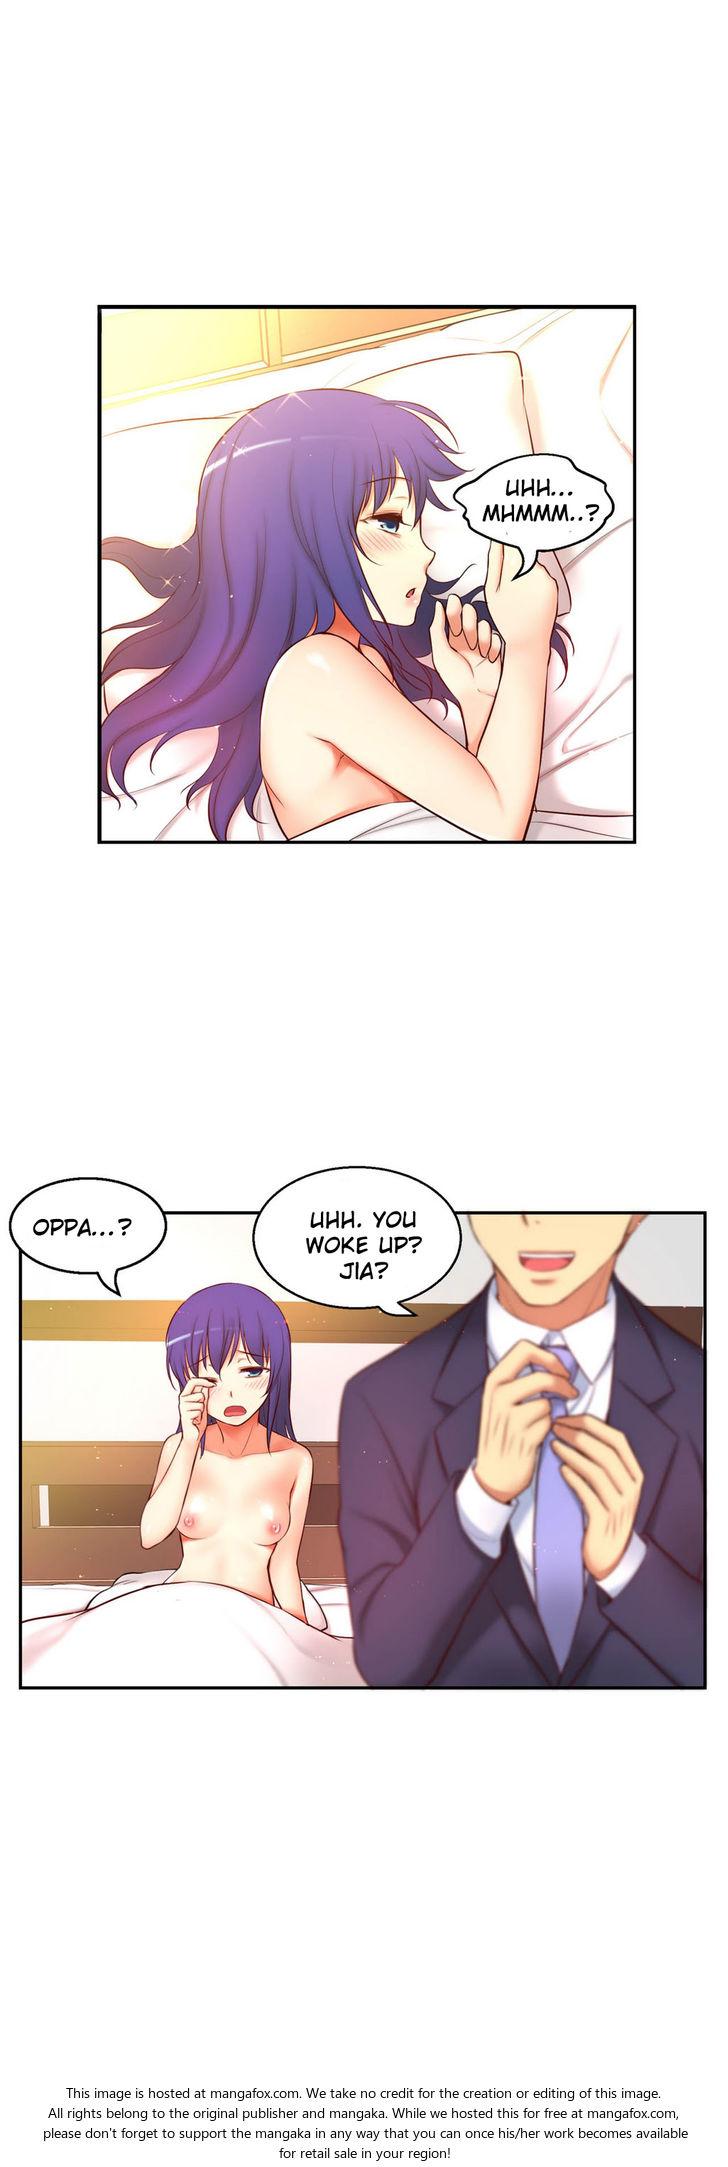 [Donggul Gom] She is Young (English) Part 1/2 1432